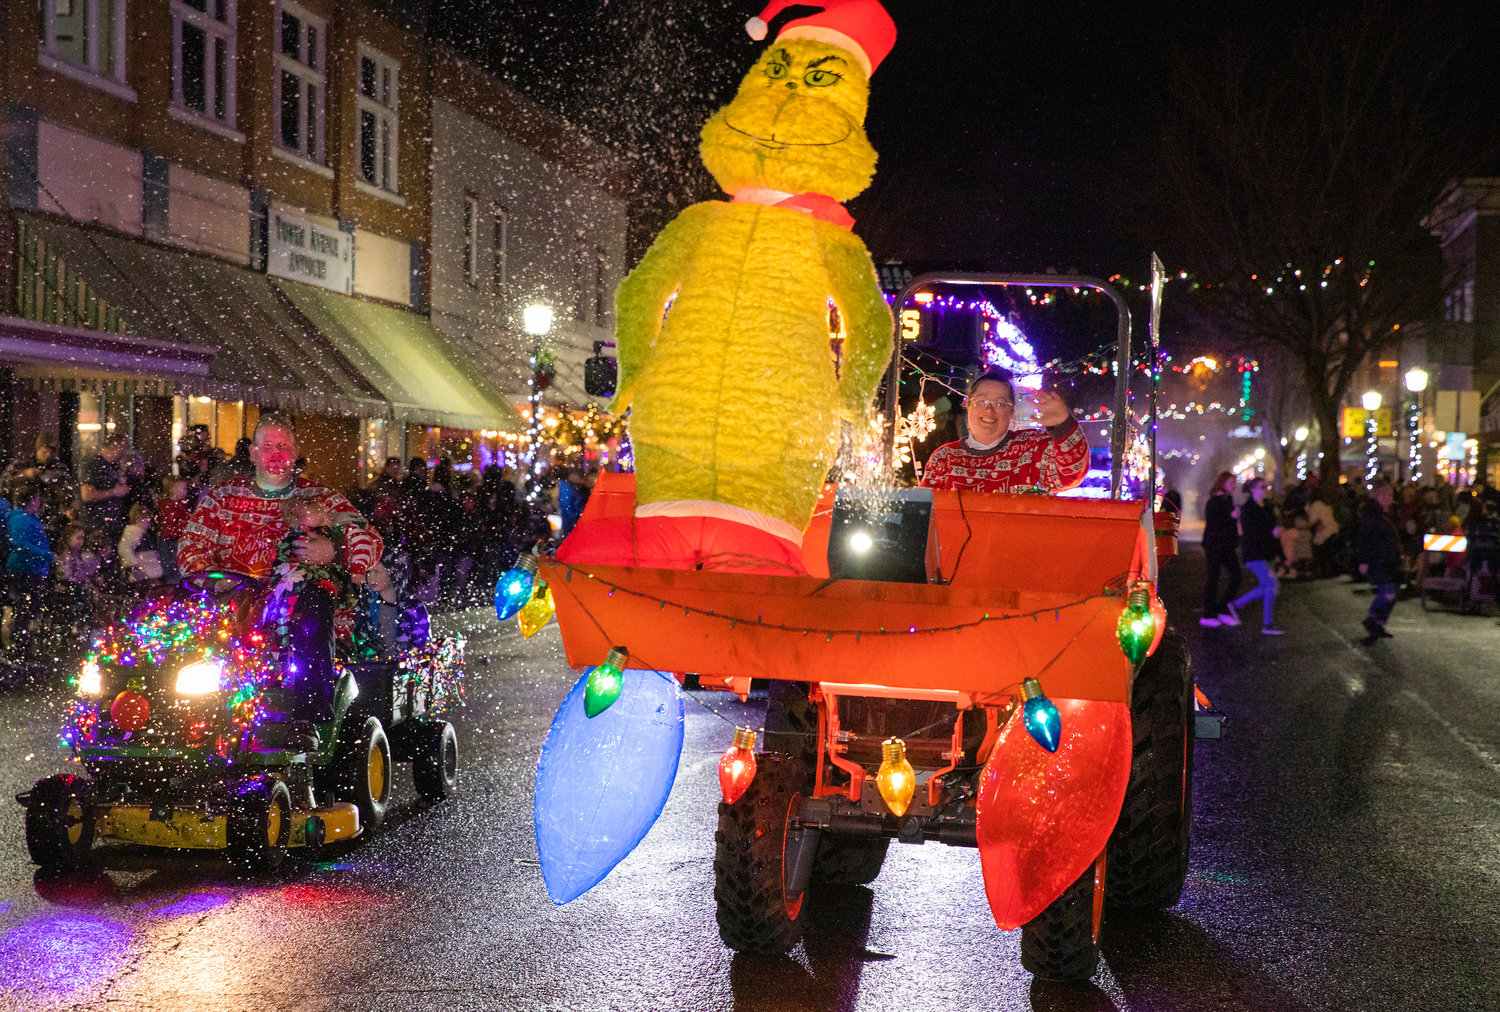 Gin and Steven Pack, with The Salvation Army, ride and wave on during the Lighted Tractor Parade Saturday night in downtown Centralia.